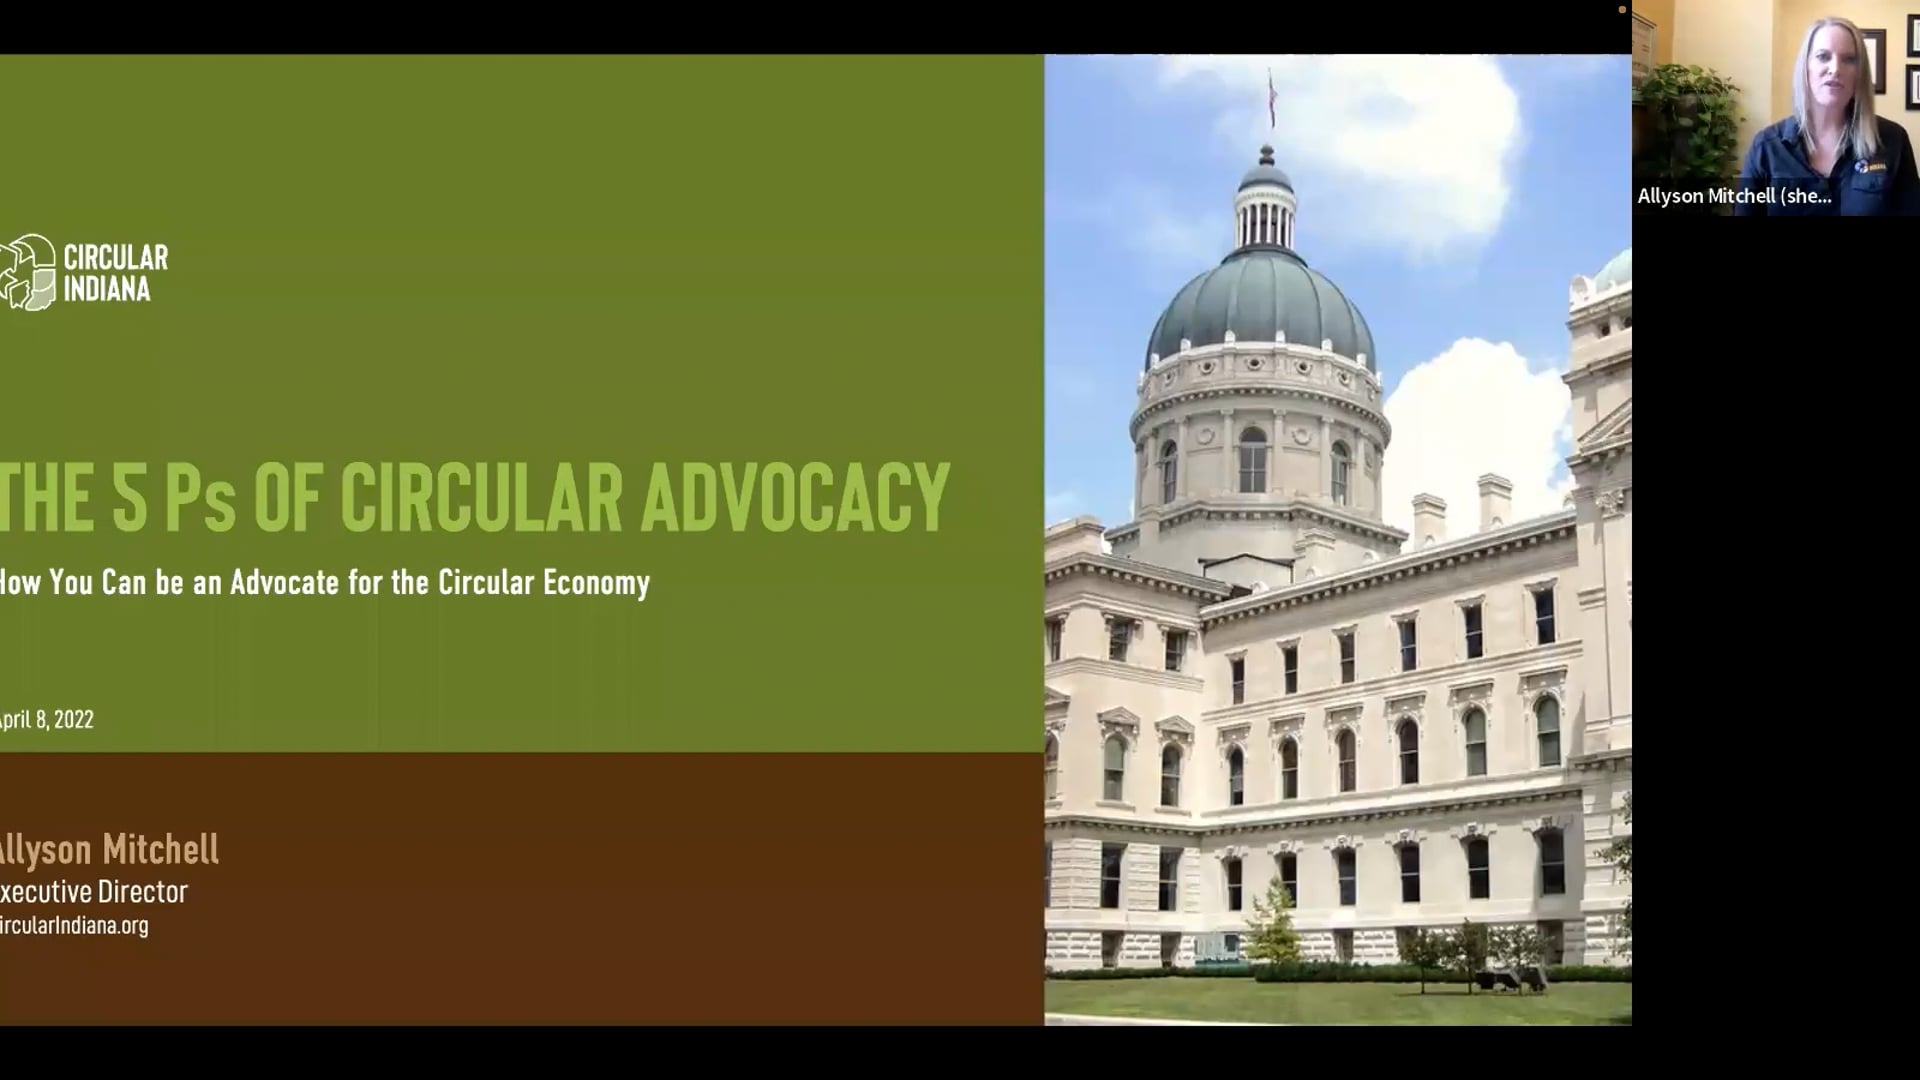 The 5 Ps of Circular Advocacy: How You Can be an Advocate for the Circular Economy